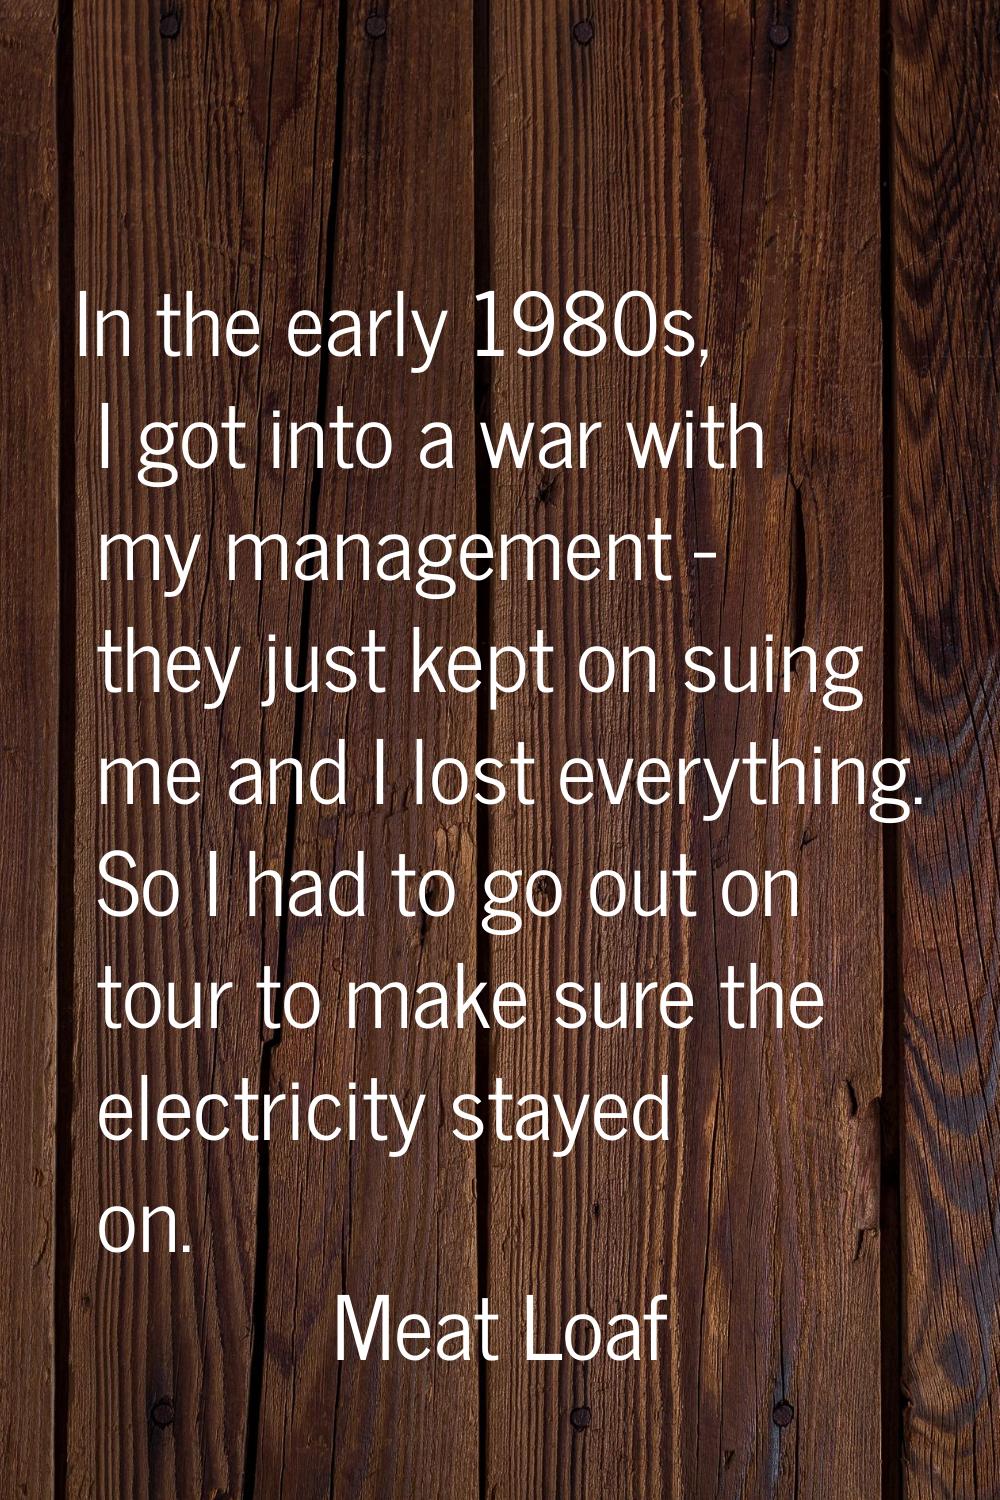 In the early 1980s, I got into a war with my management - they just kept on suing me and I lost eve